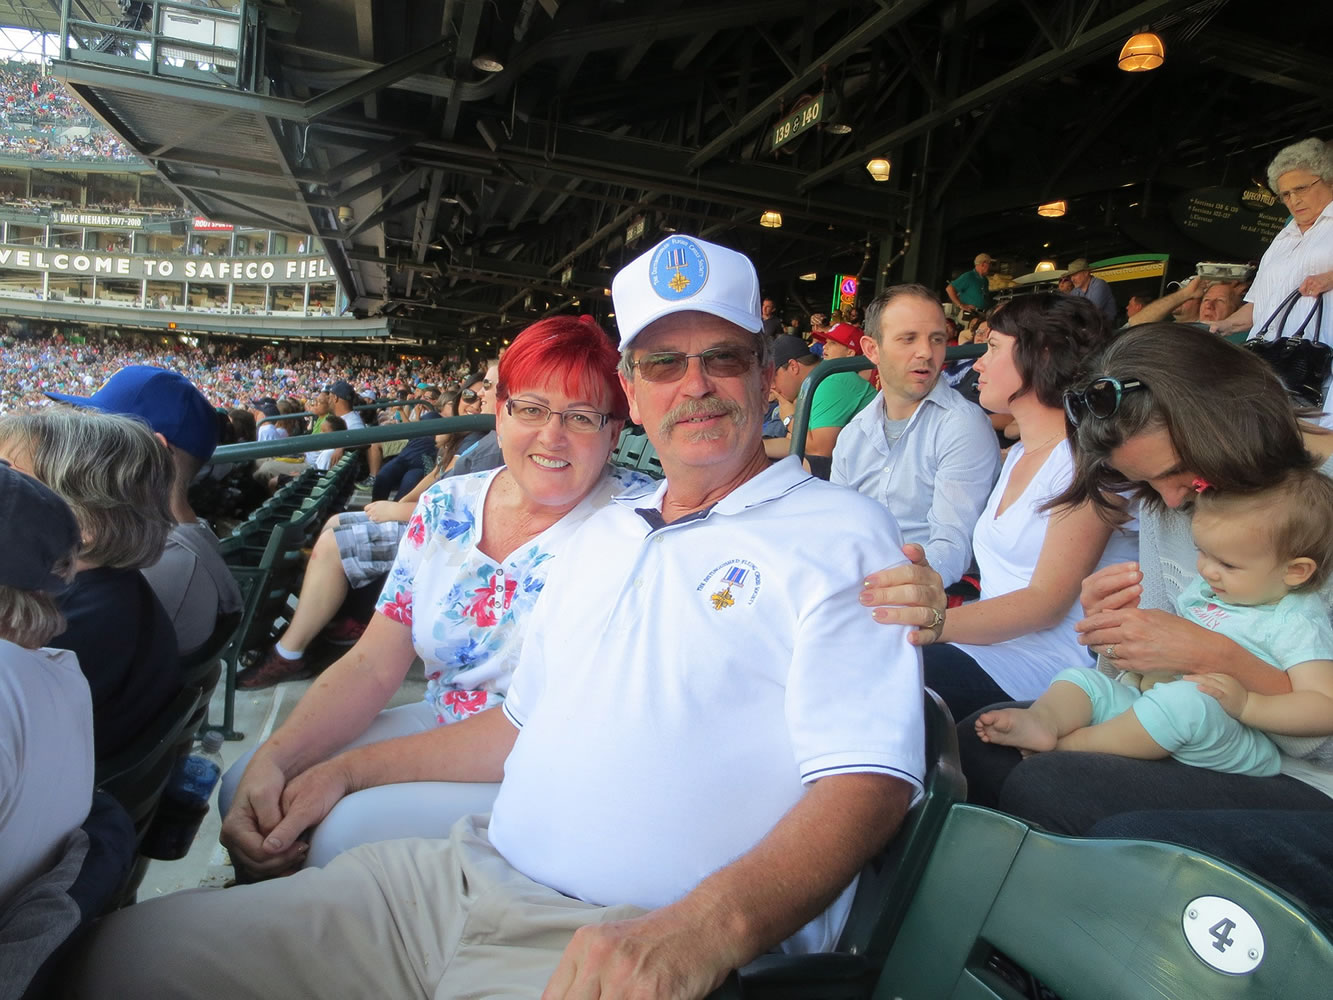 Clark County: Floreen and Dave Clark at a Seattle Mariners game on July 12, where Vietnam veteran Dave Clark was honored before the game as part of a tribute to the Distinguished Flying Cross Society.